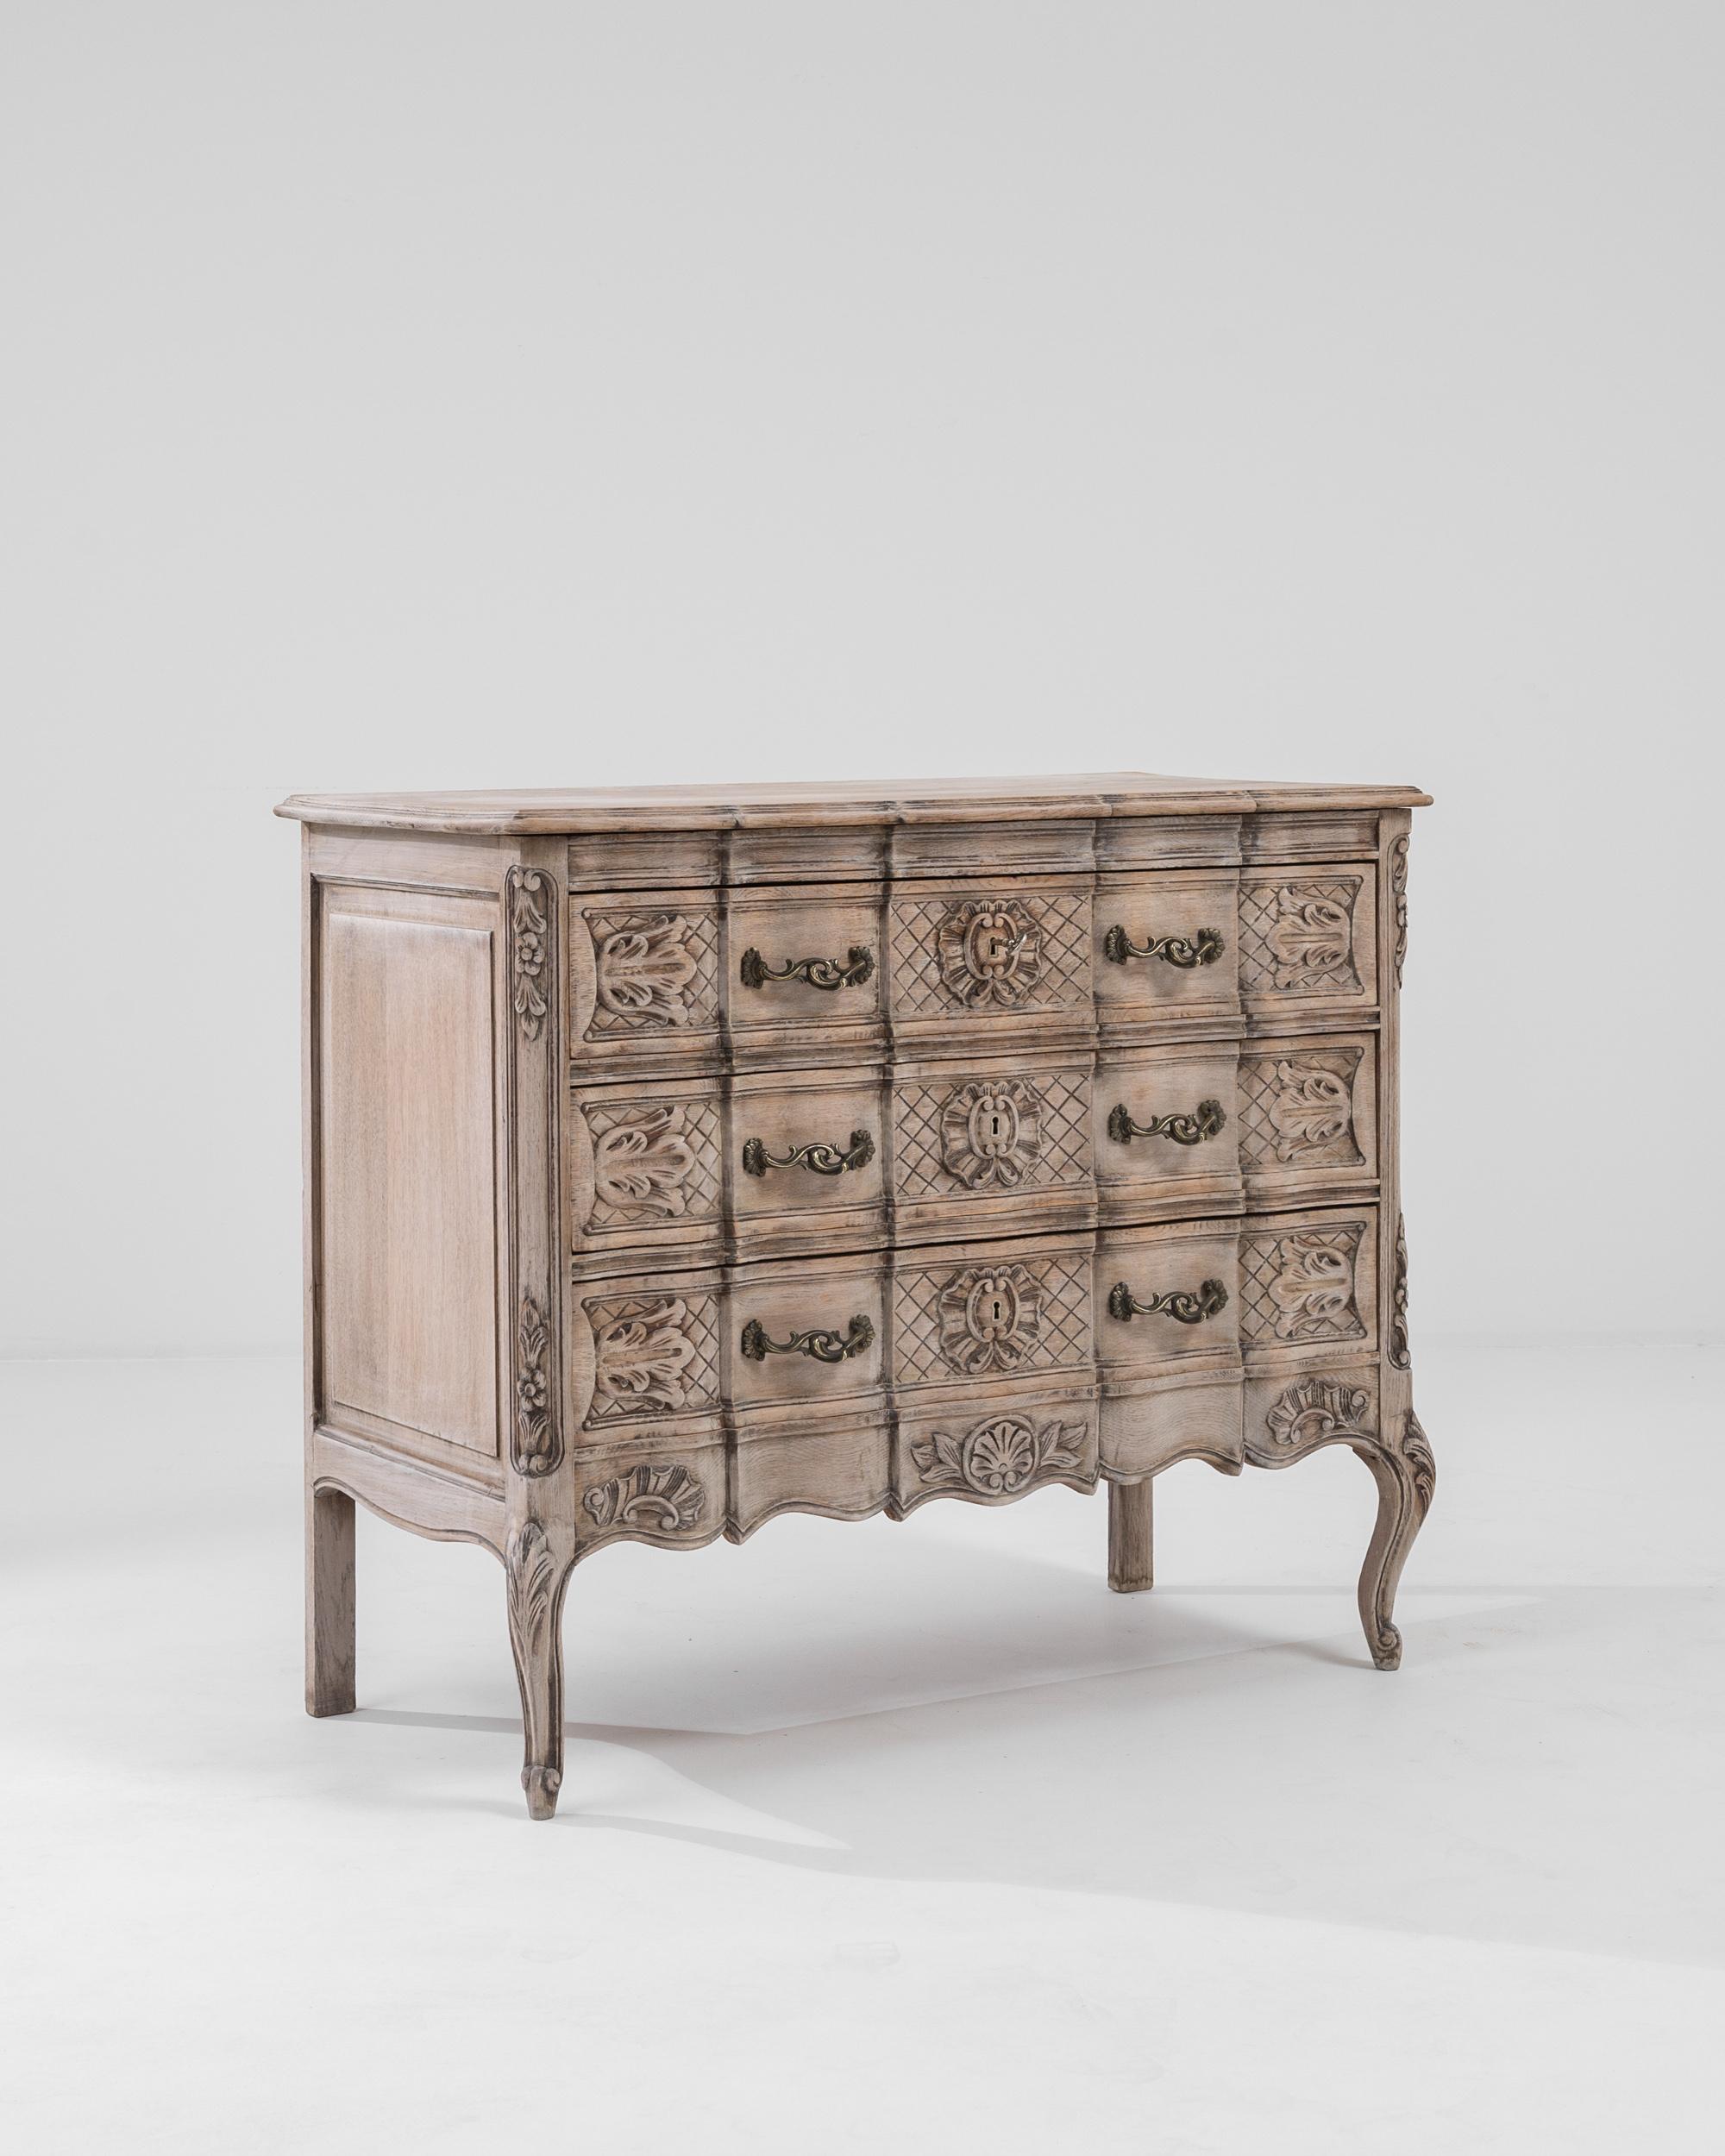 A 20th century carved oak commode produced in France, this opulent commode imparts a strong Louis XV influence with a soft touch. Standing on cabriole feet, the intricate commode features a scalloped apron, a beveled top and three large drawers